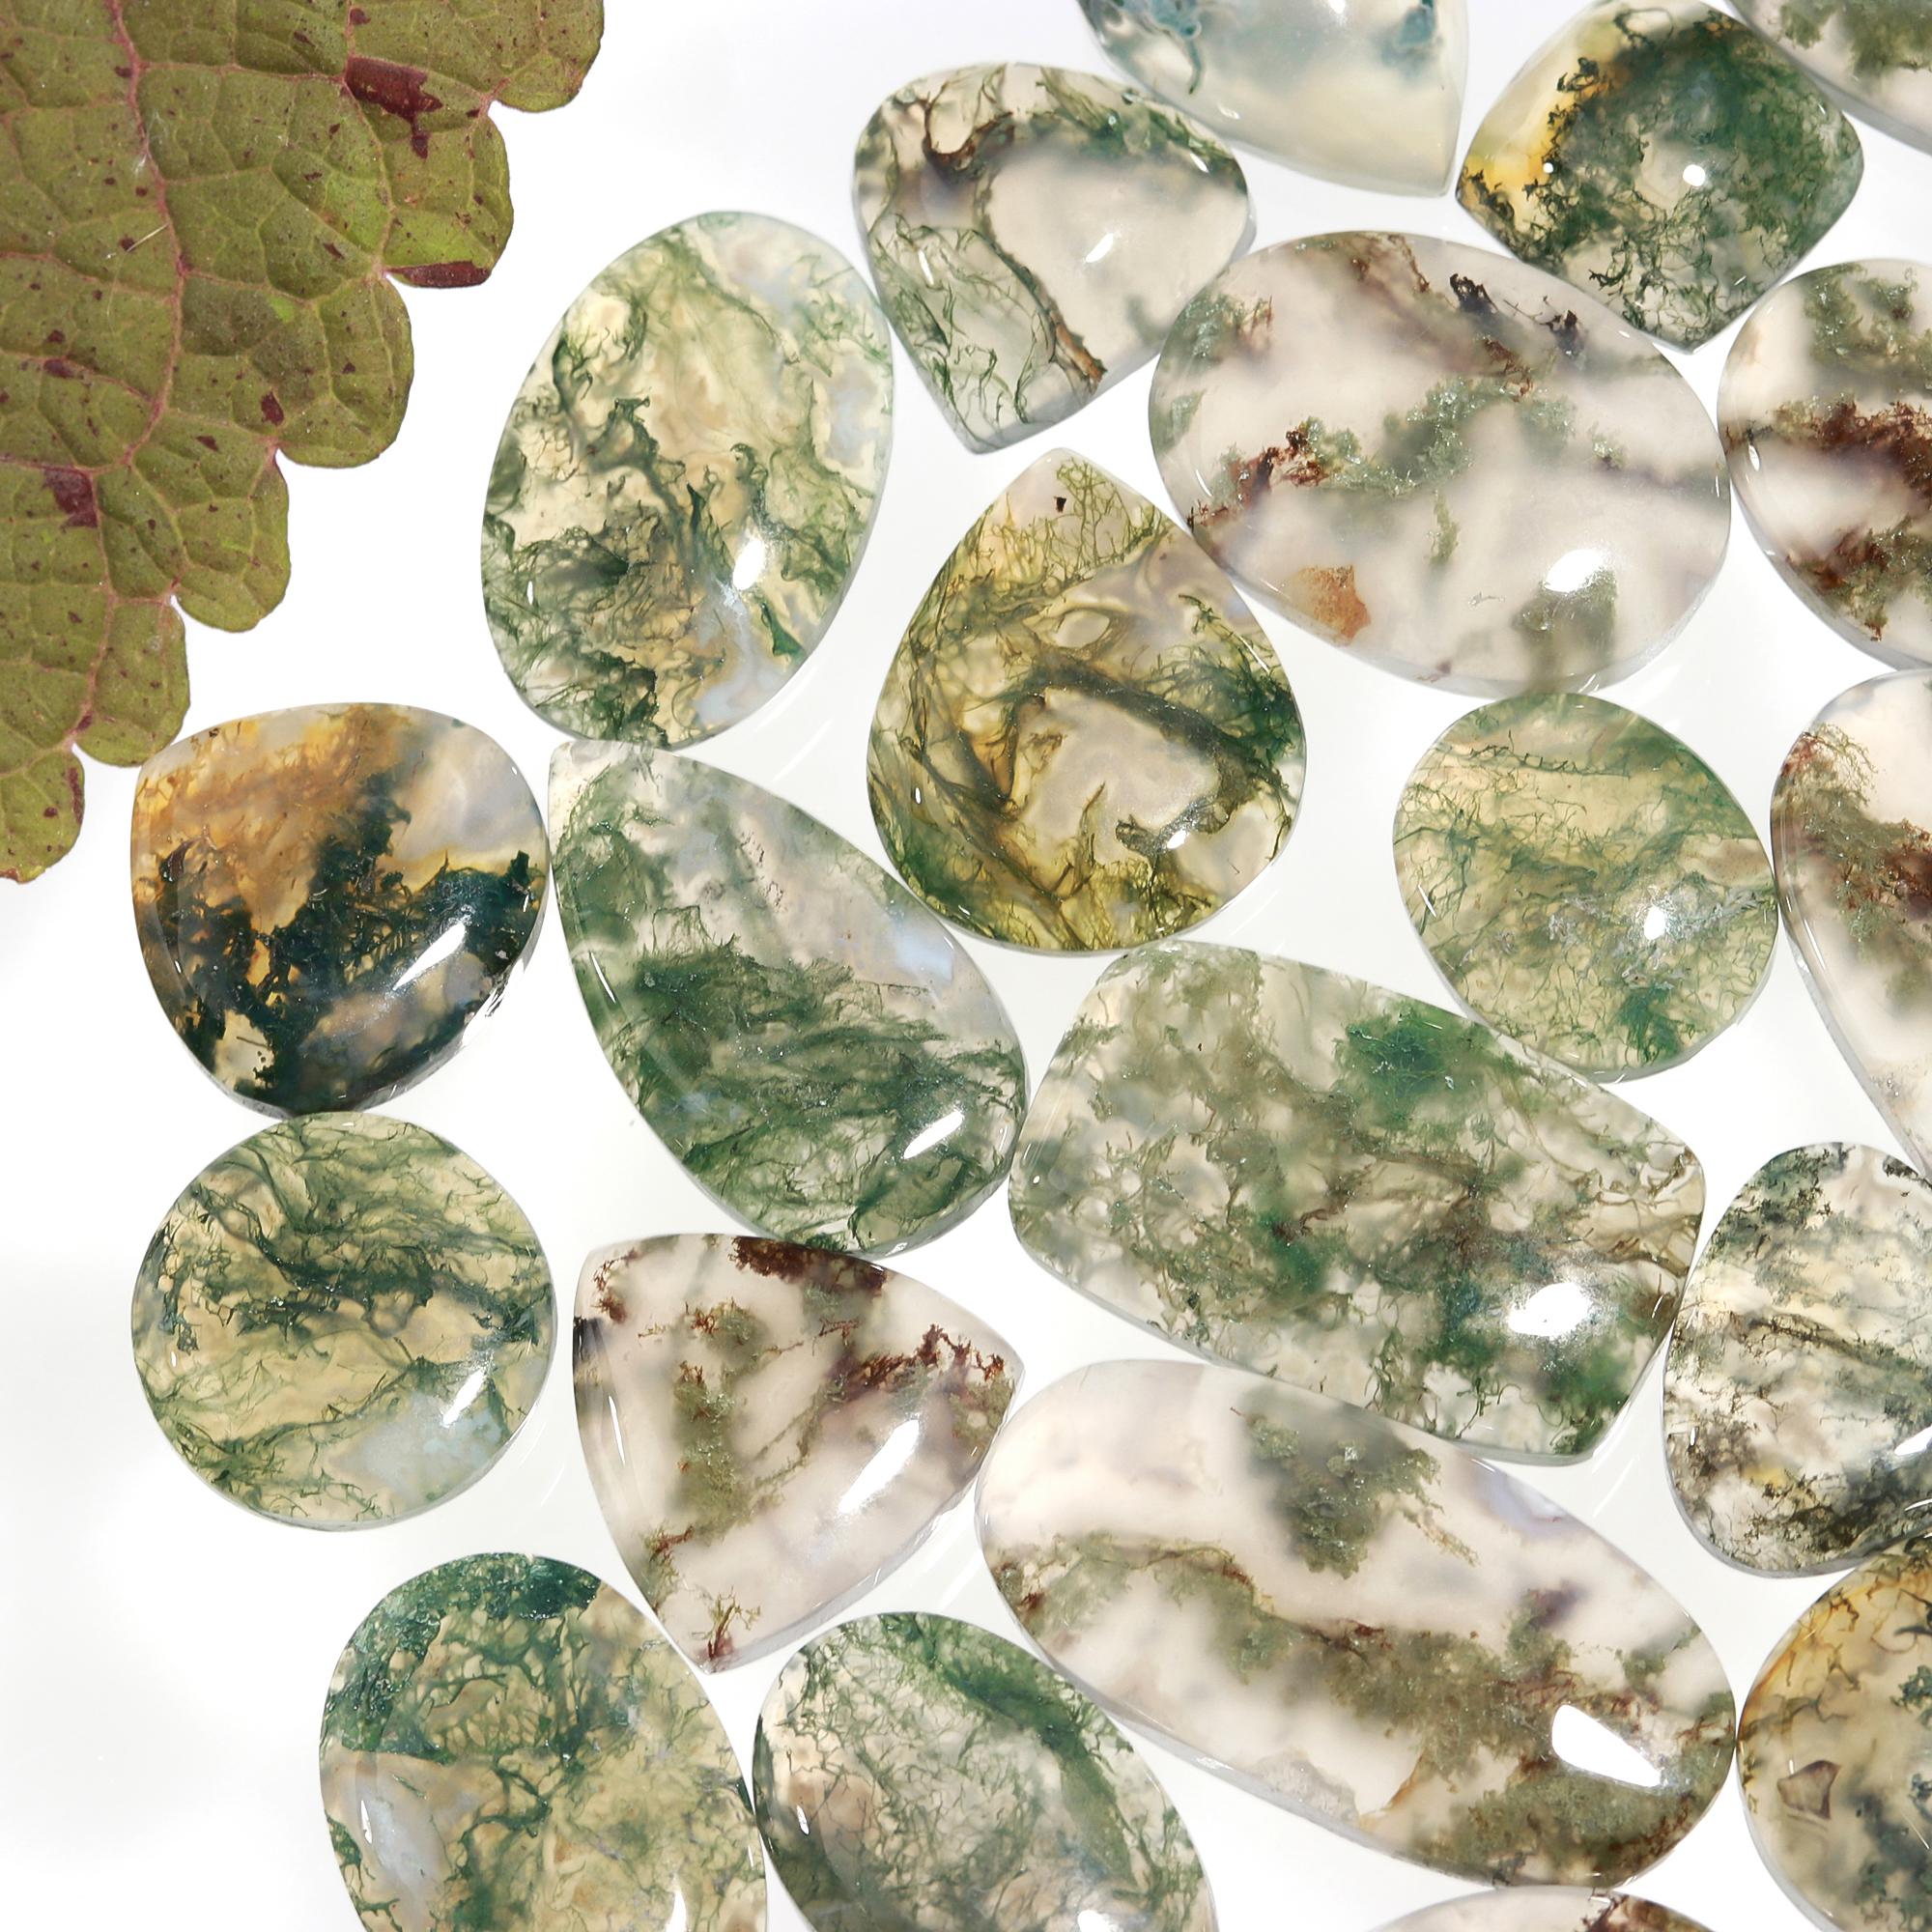 28Pcs lot 301Cts Natural Green Moss Agate Cabochon Lots Mixed Shapes And Sizes Moss Agate loose gemstone Cabochon Wholesale Lot 22x12 10x10mm